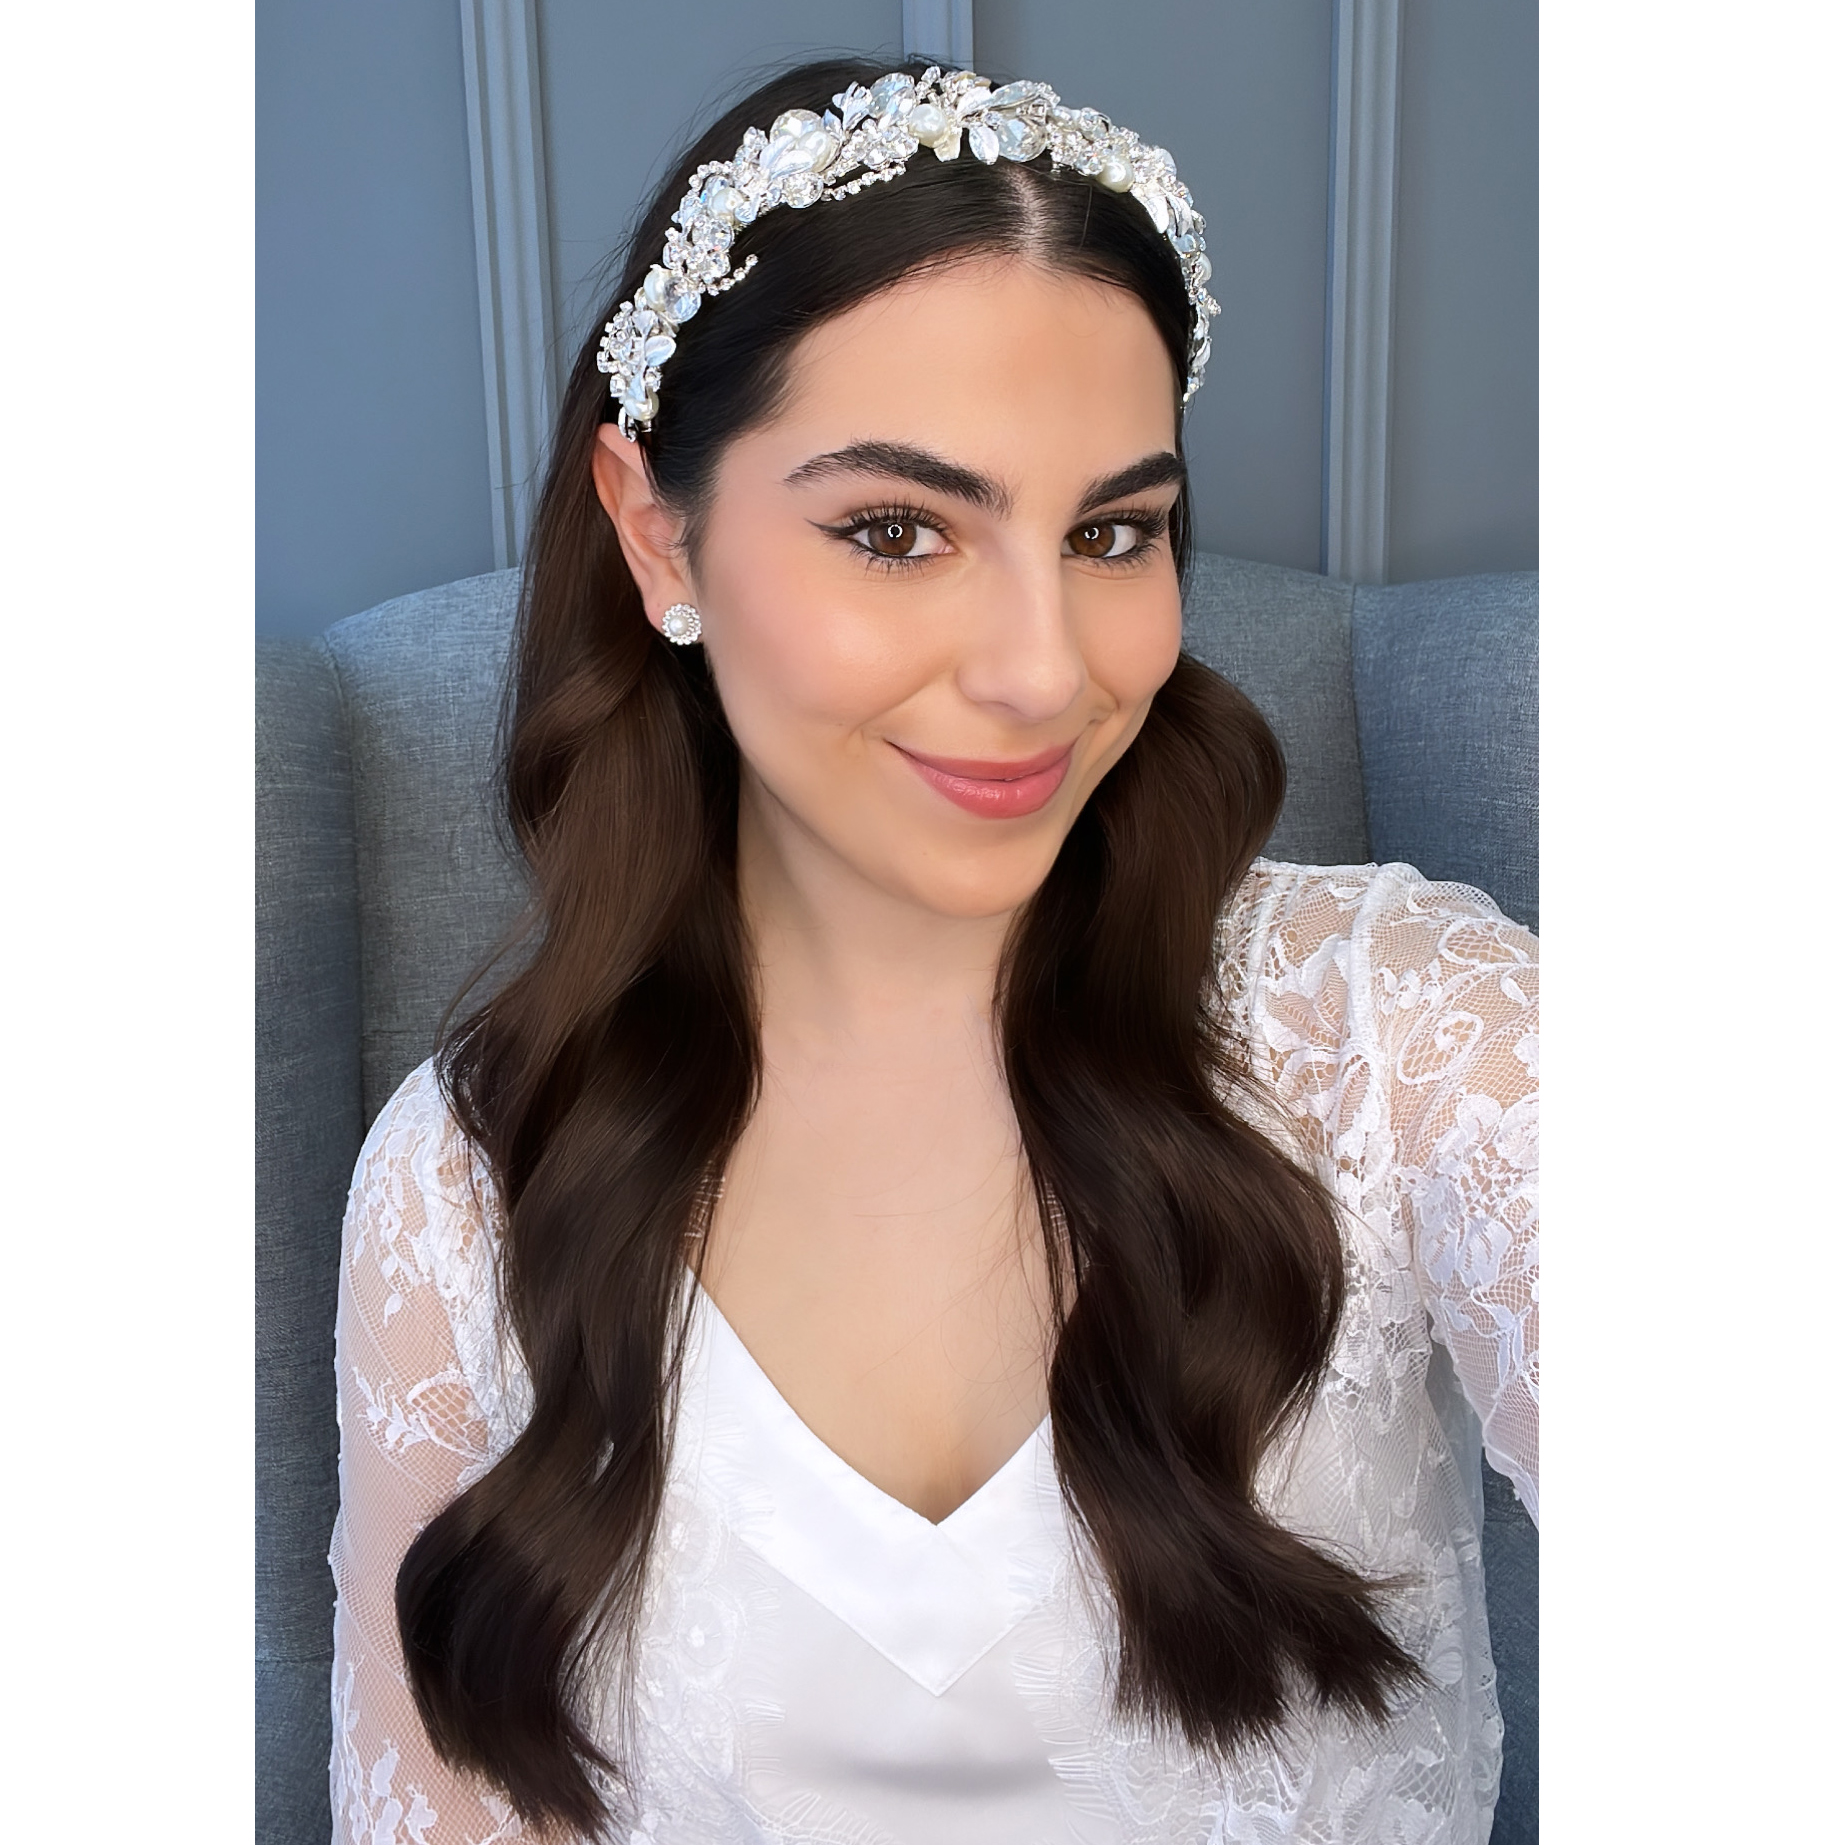 Merlene Bridal Headpiece, a classic wedding hair accessories from Roman and French